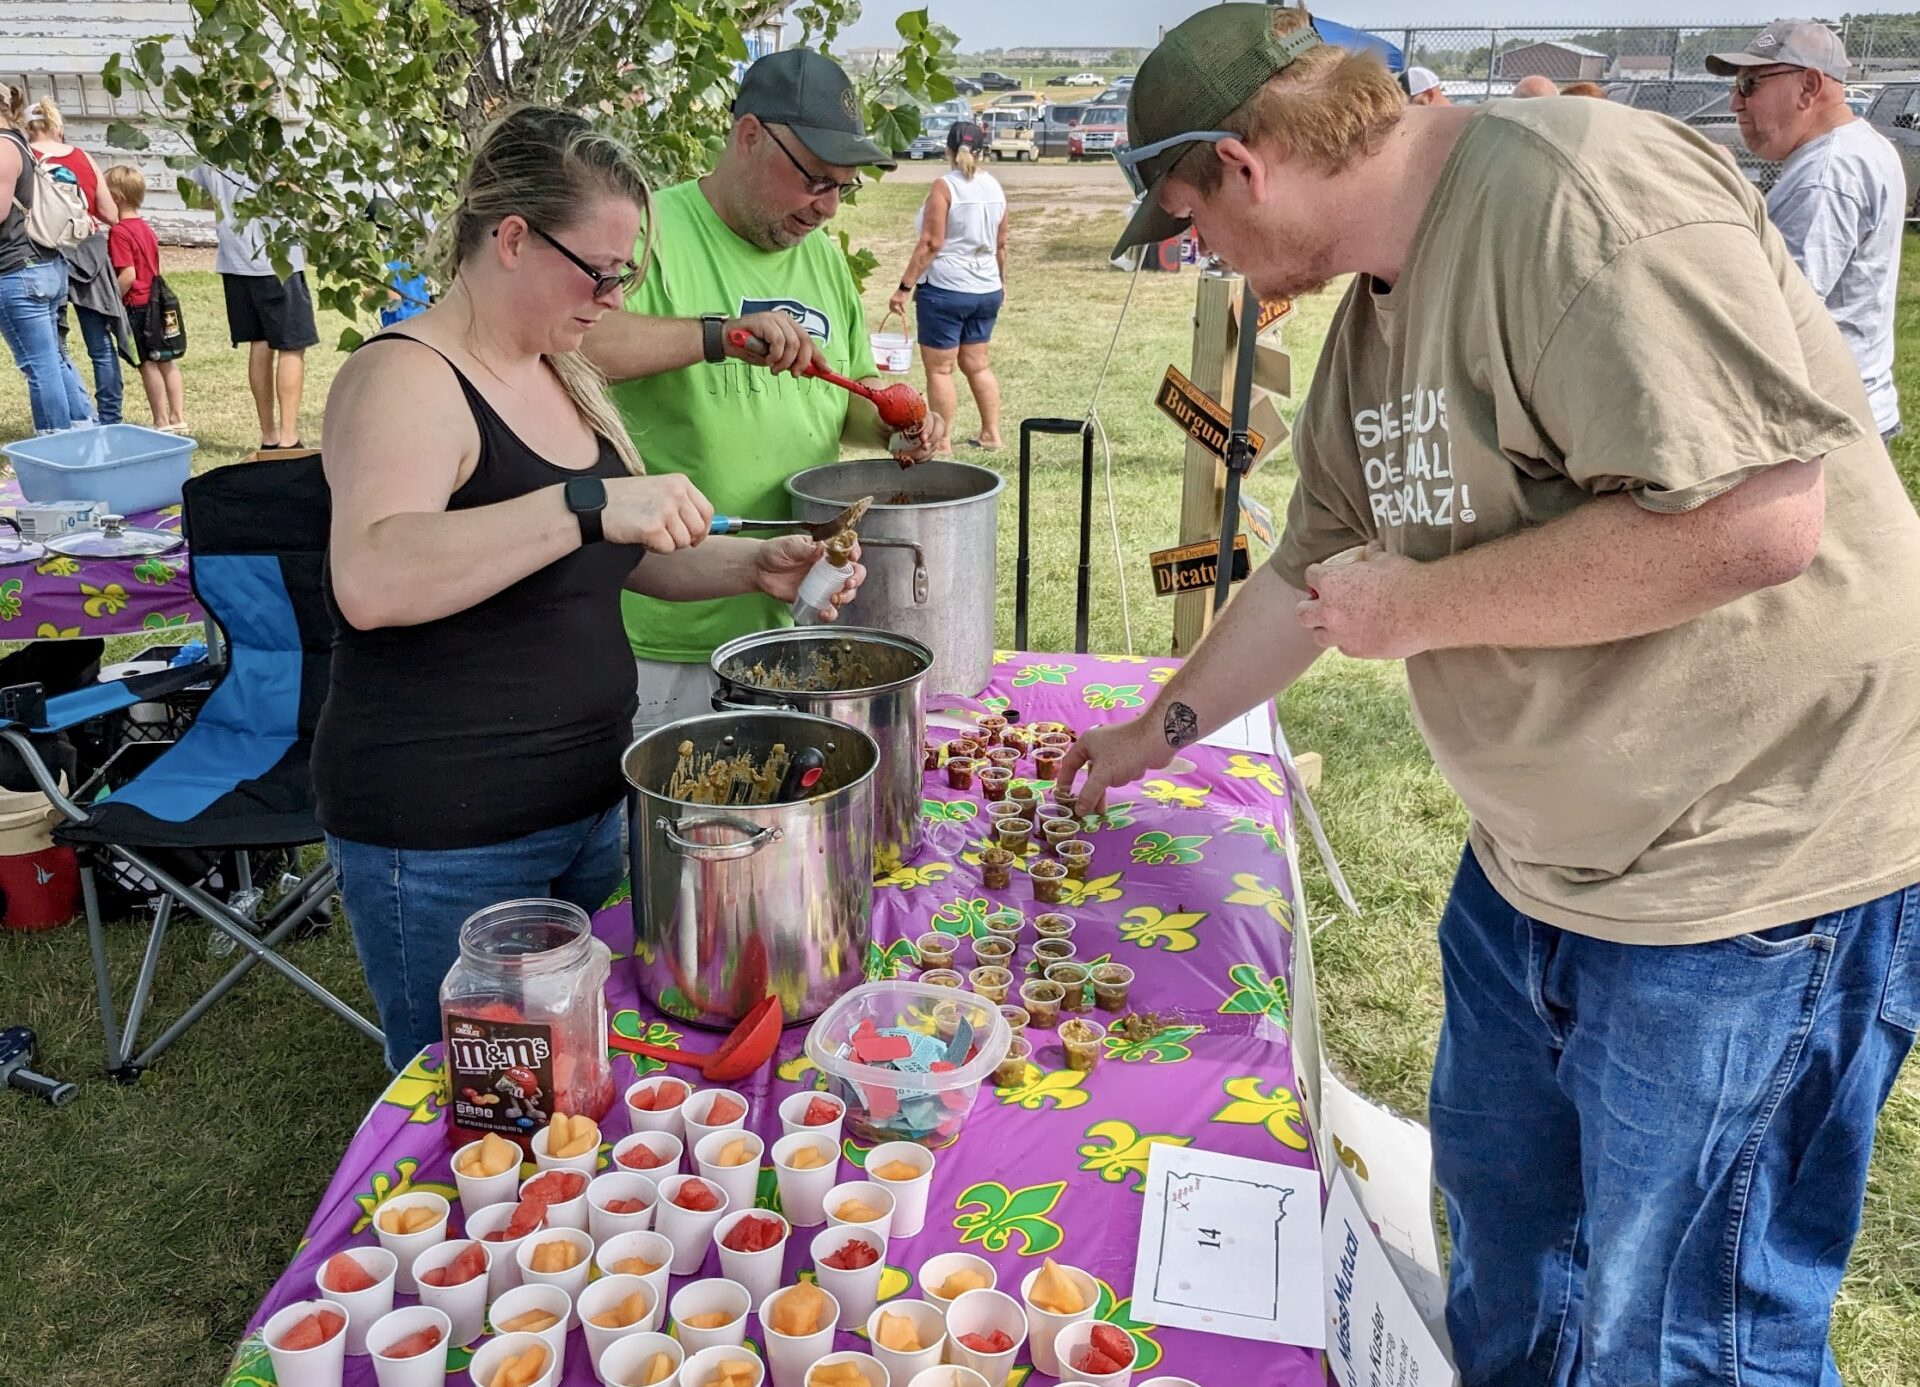 Folks lined up to taste samples during the 2023 South Dakota State Chili Cook-off Saturday at the Brown County Fair. Aberdeen Insider photo by Scott Waltman